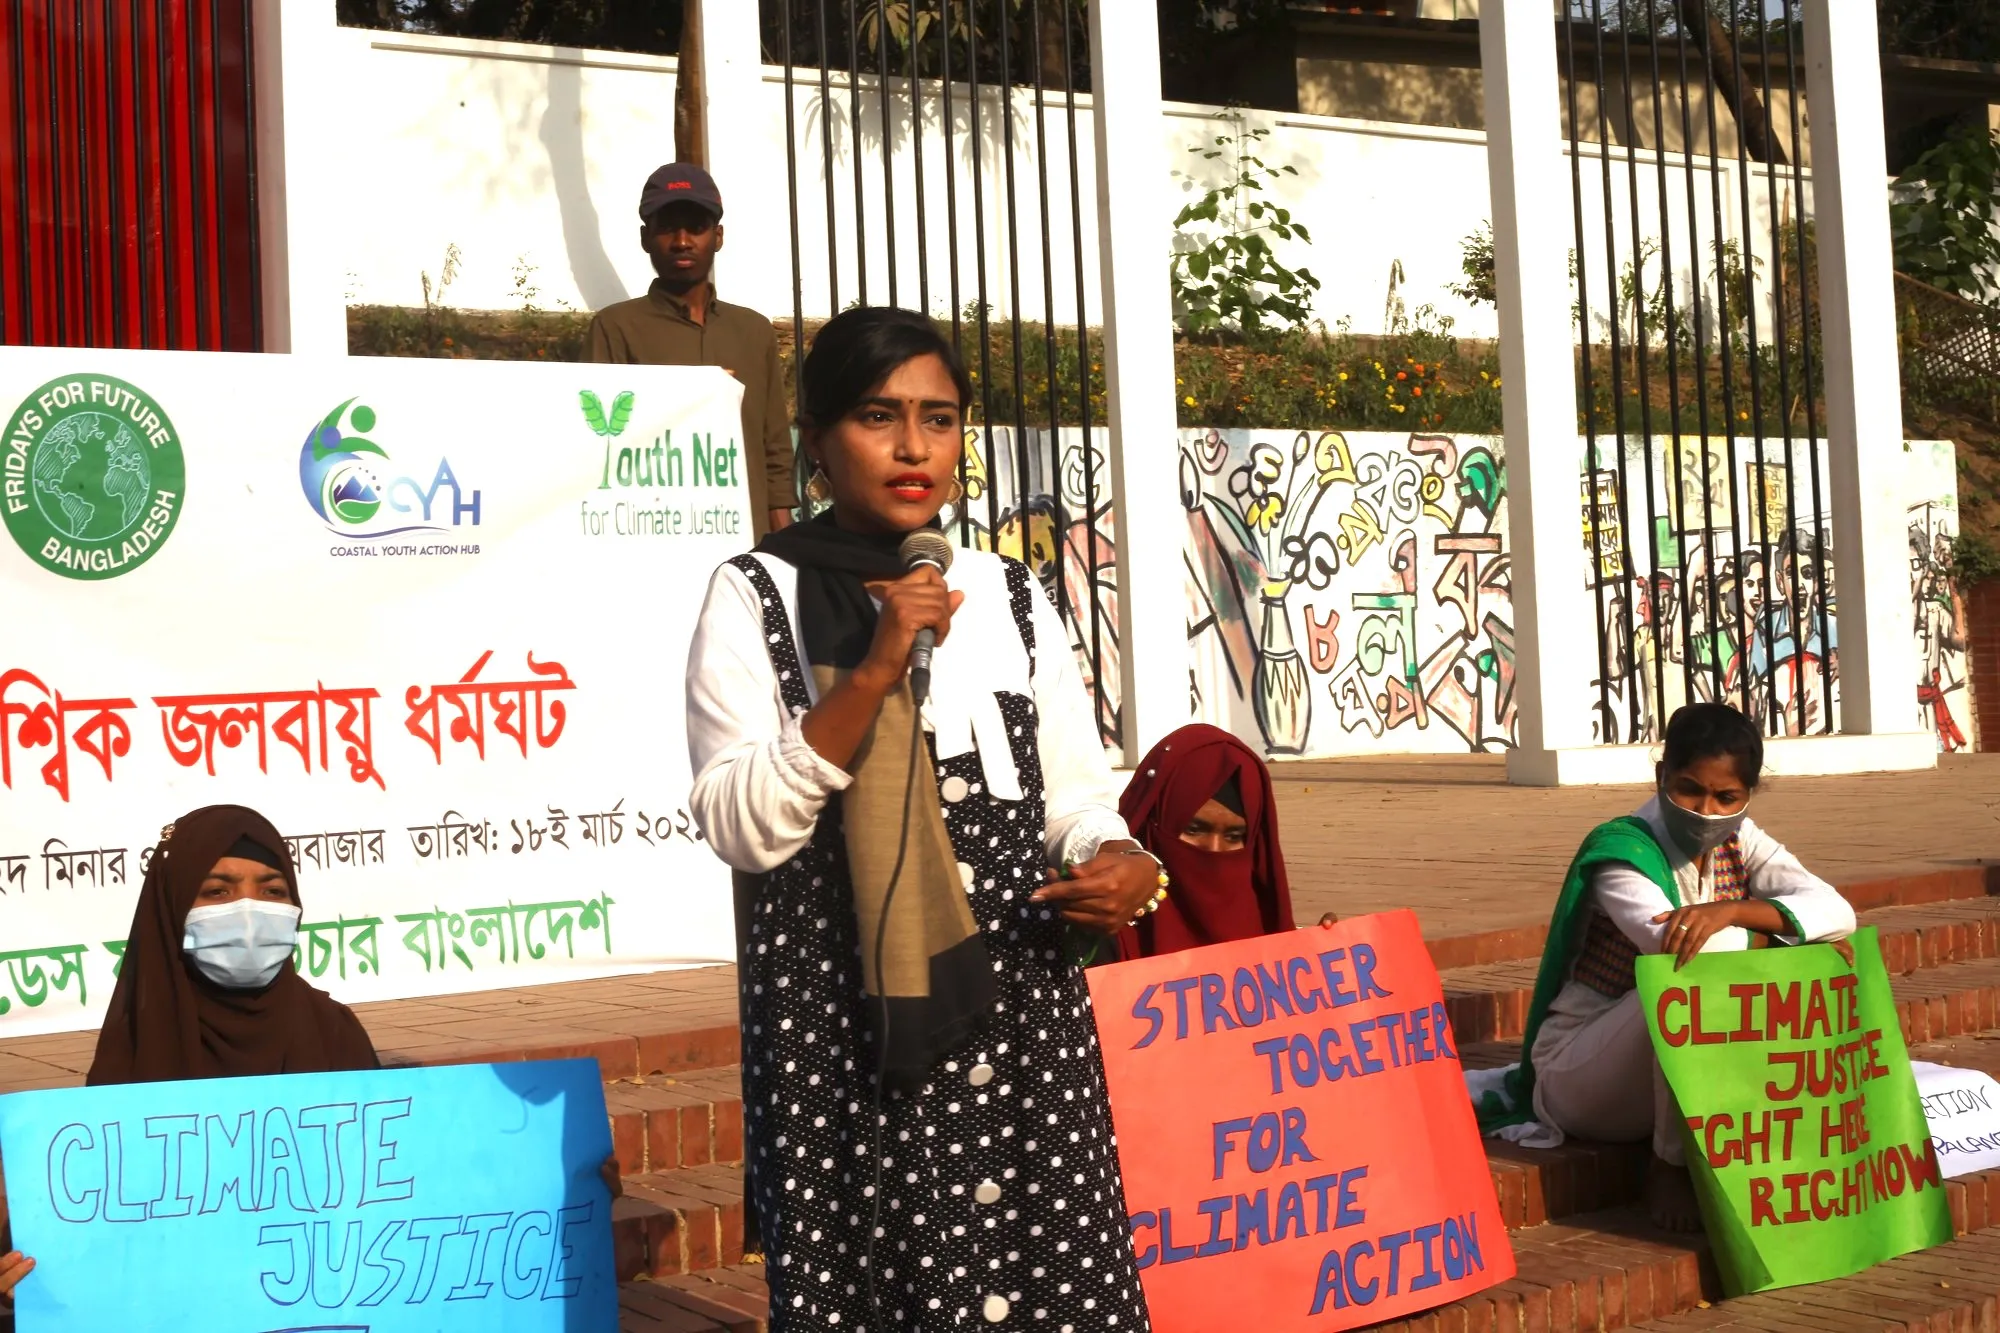 A woman holds a microphone at a climate justice event in Bangladesh.